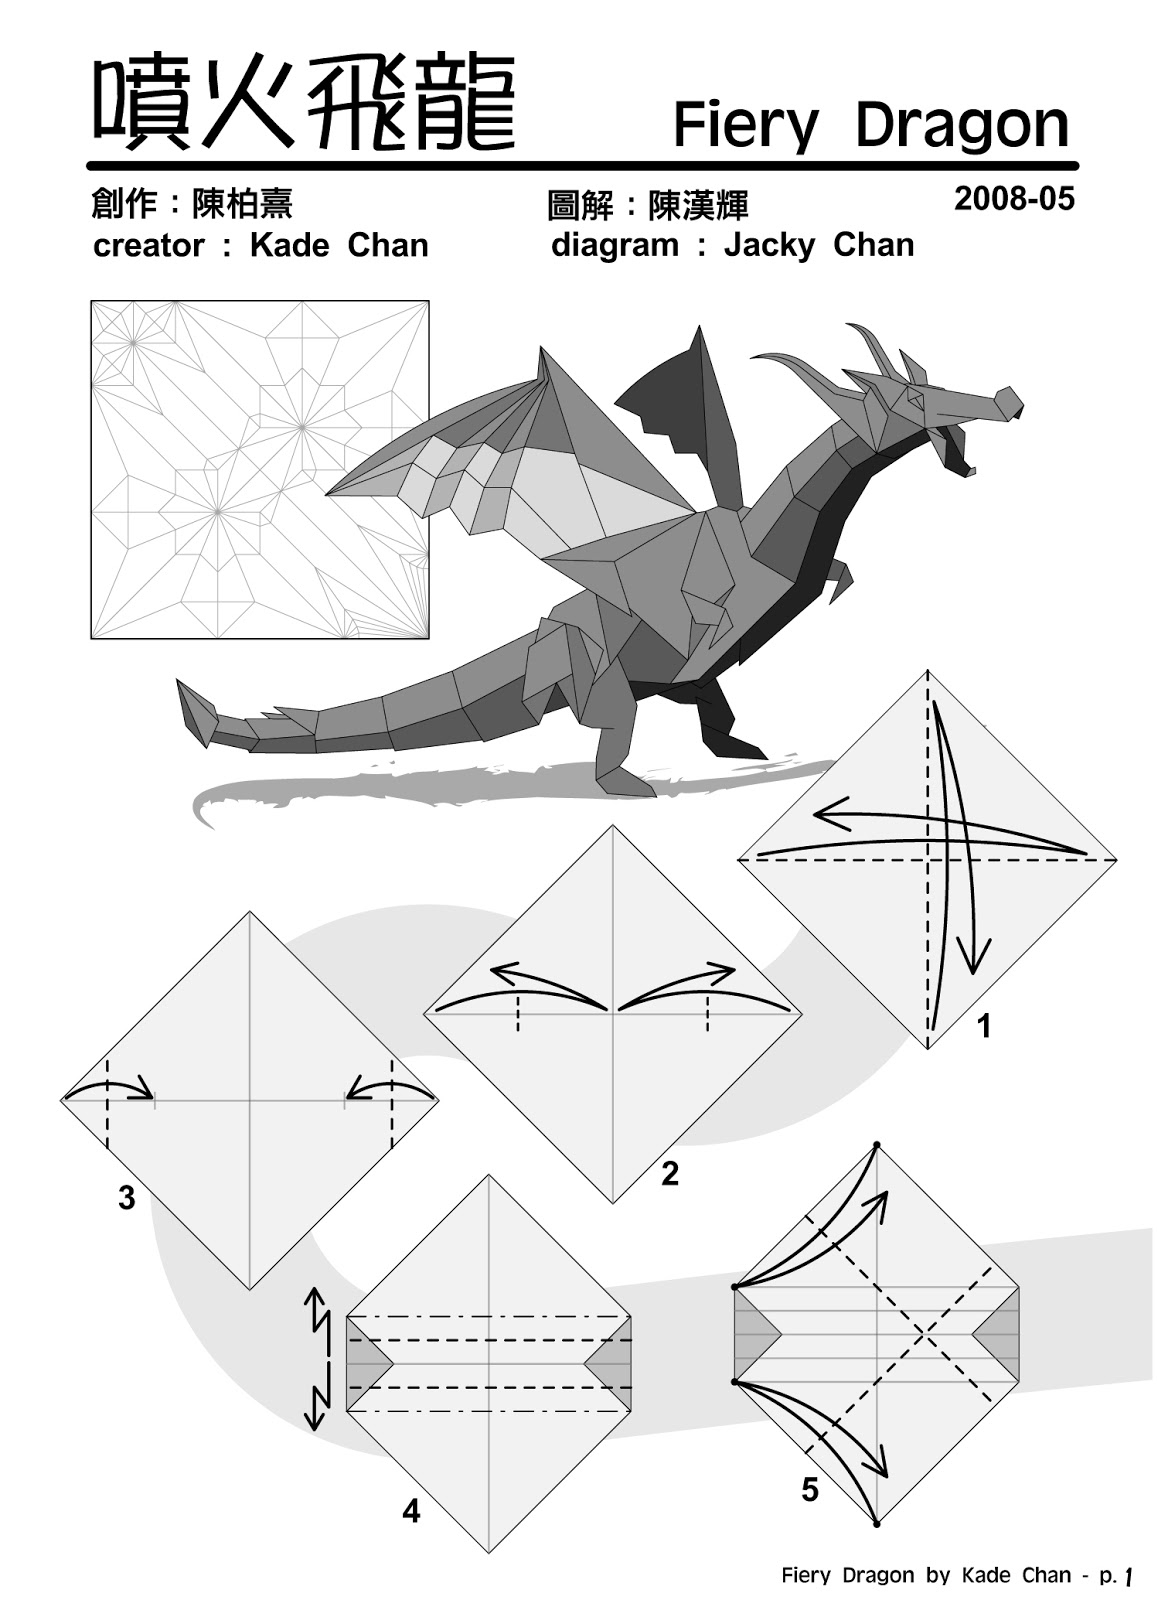 Simple Origami Instructions Complex Origami Diagram Diagrams For Origami Models Wiring